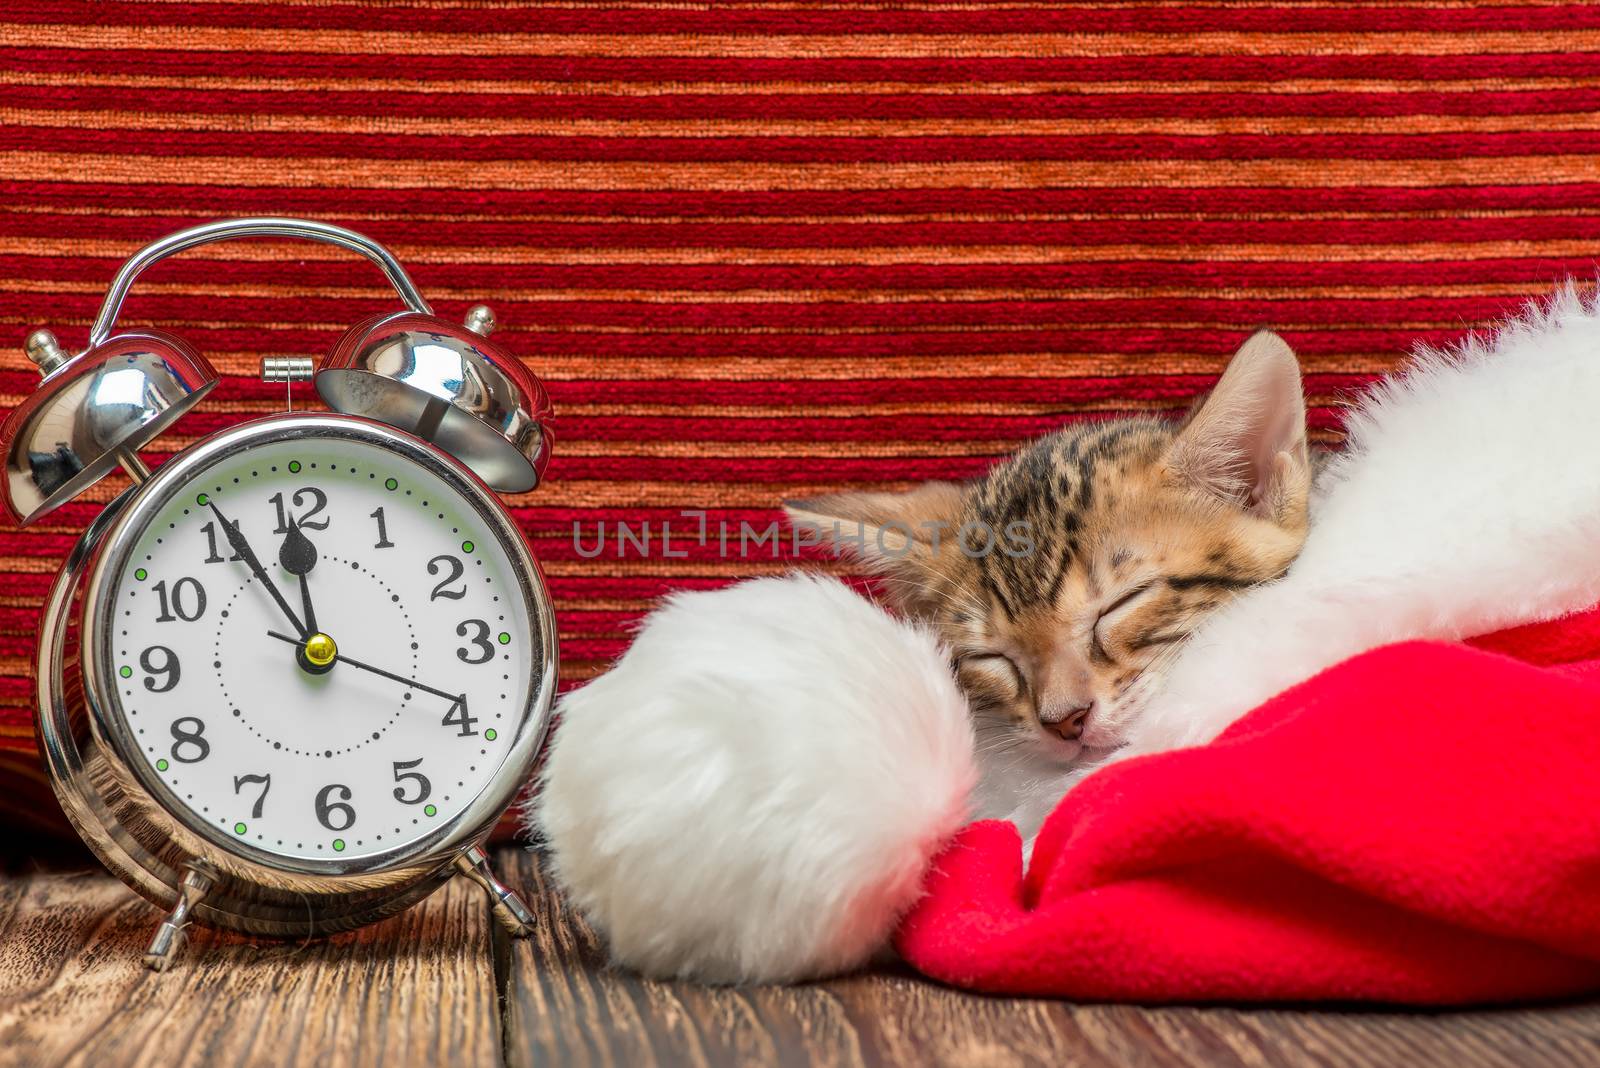 concept photo meeting of the new year, the kitten sleeps in Santa hat near the alarm clock